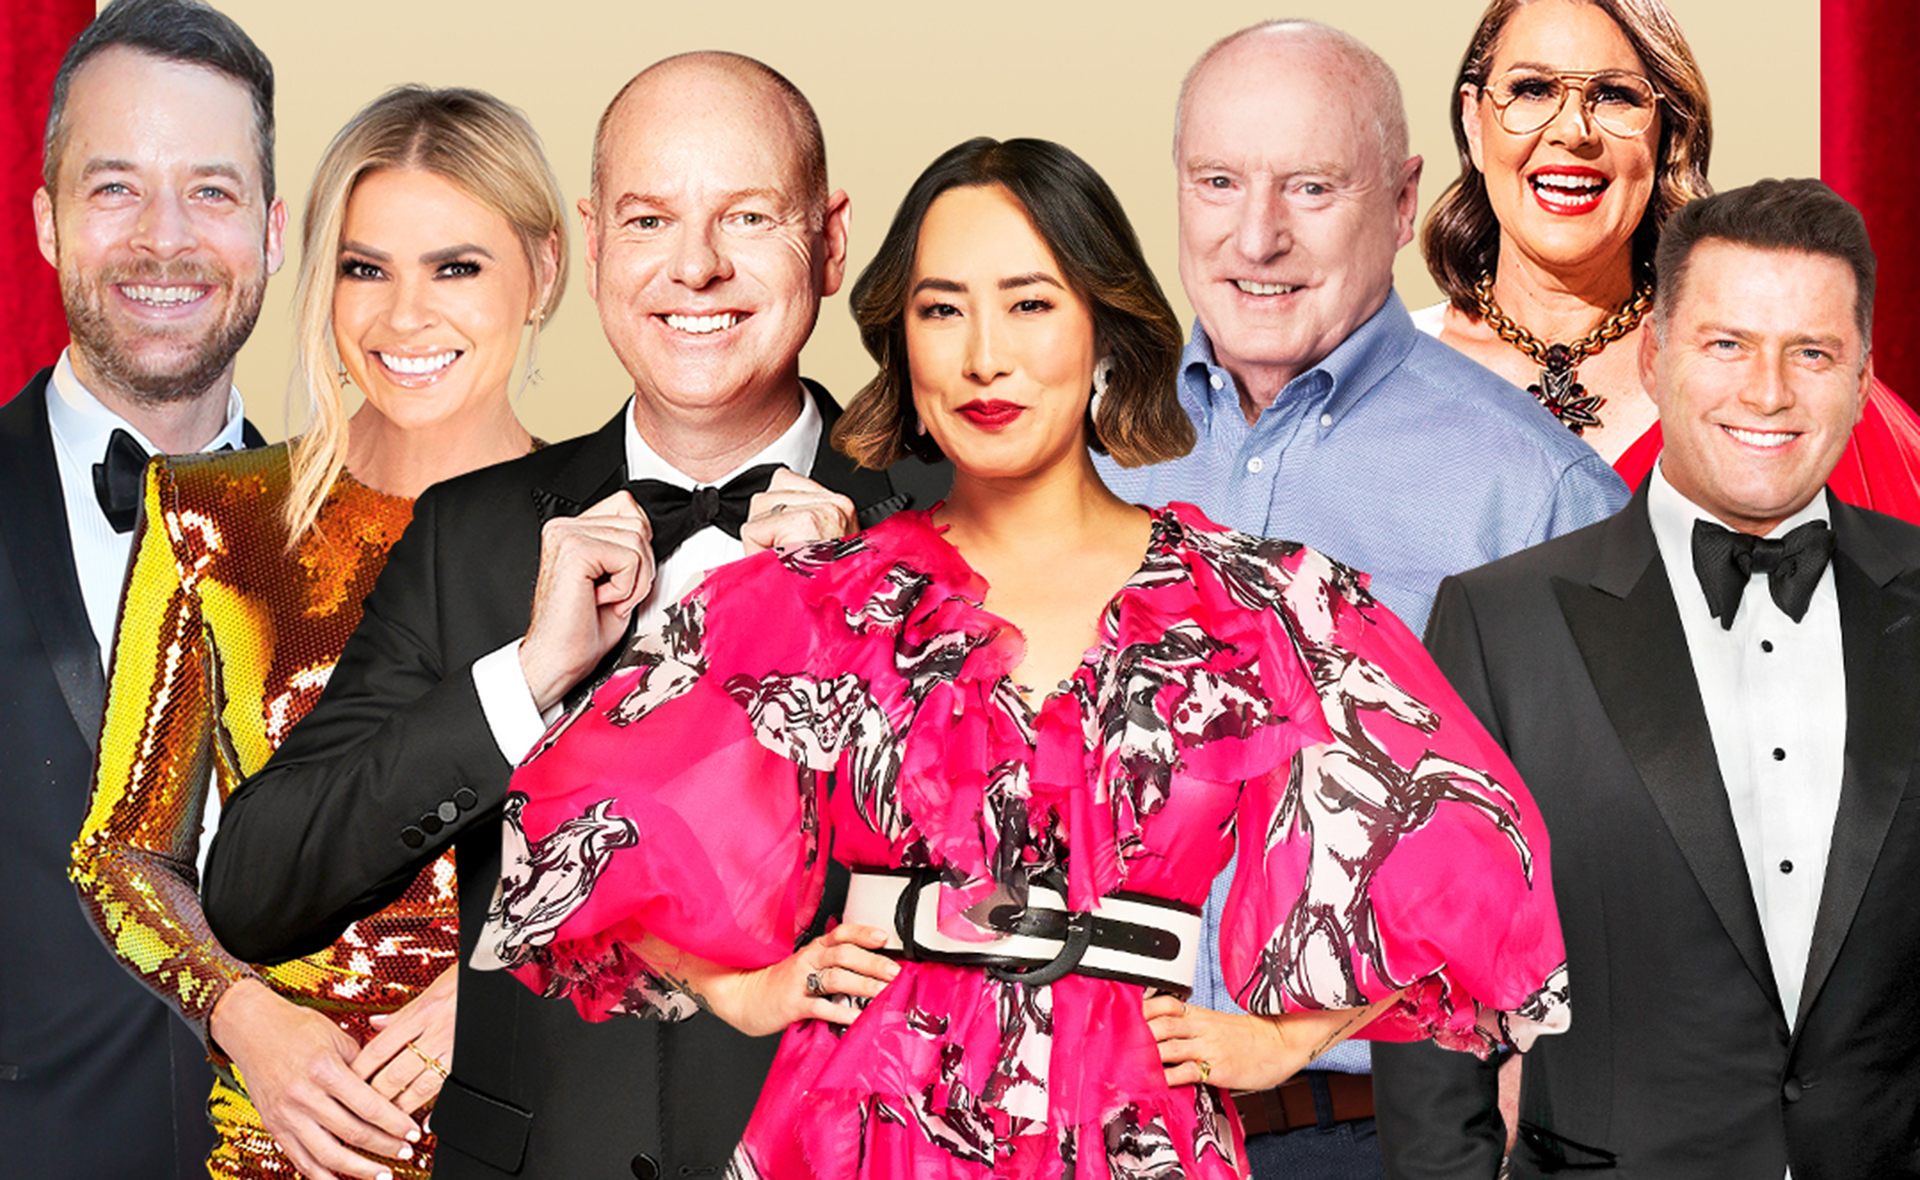 Meet the Gold Logie nominees for the 2022 TV WEEK Logie Awards